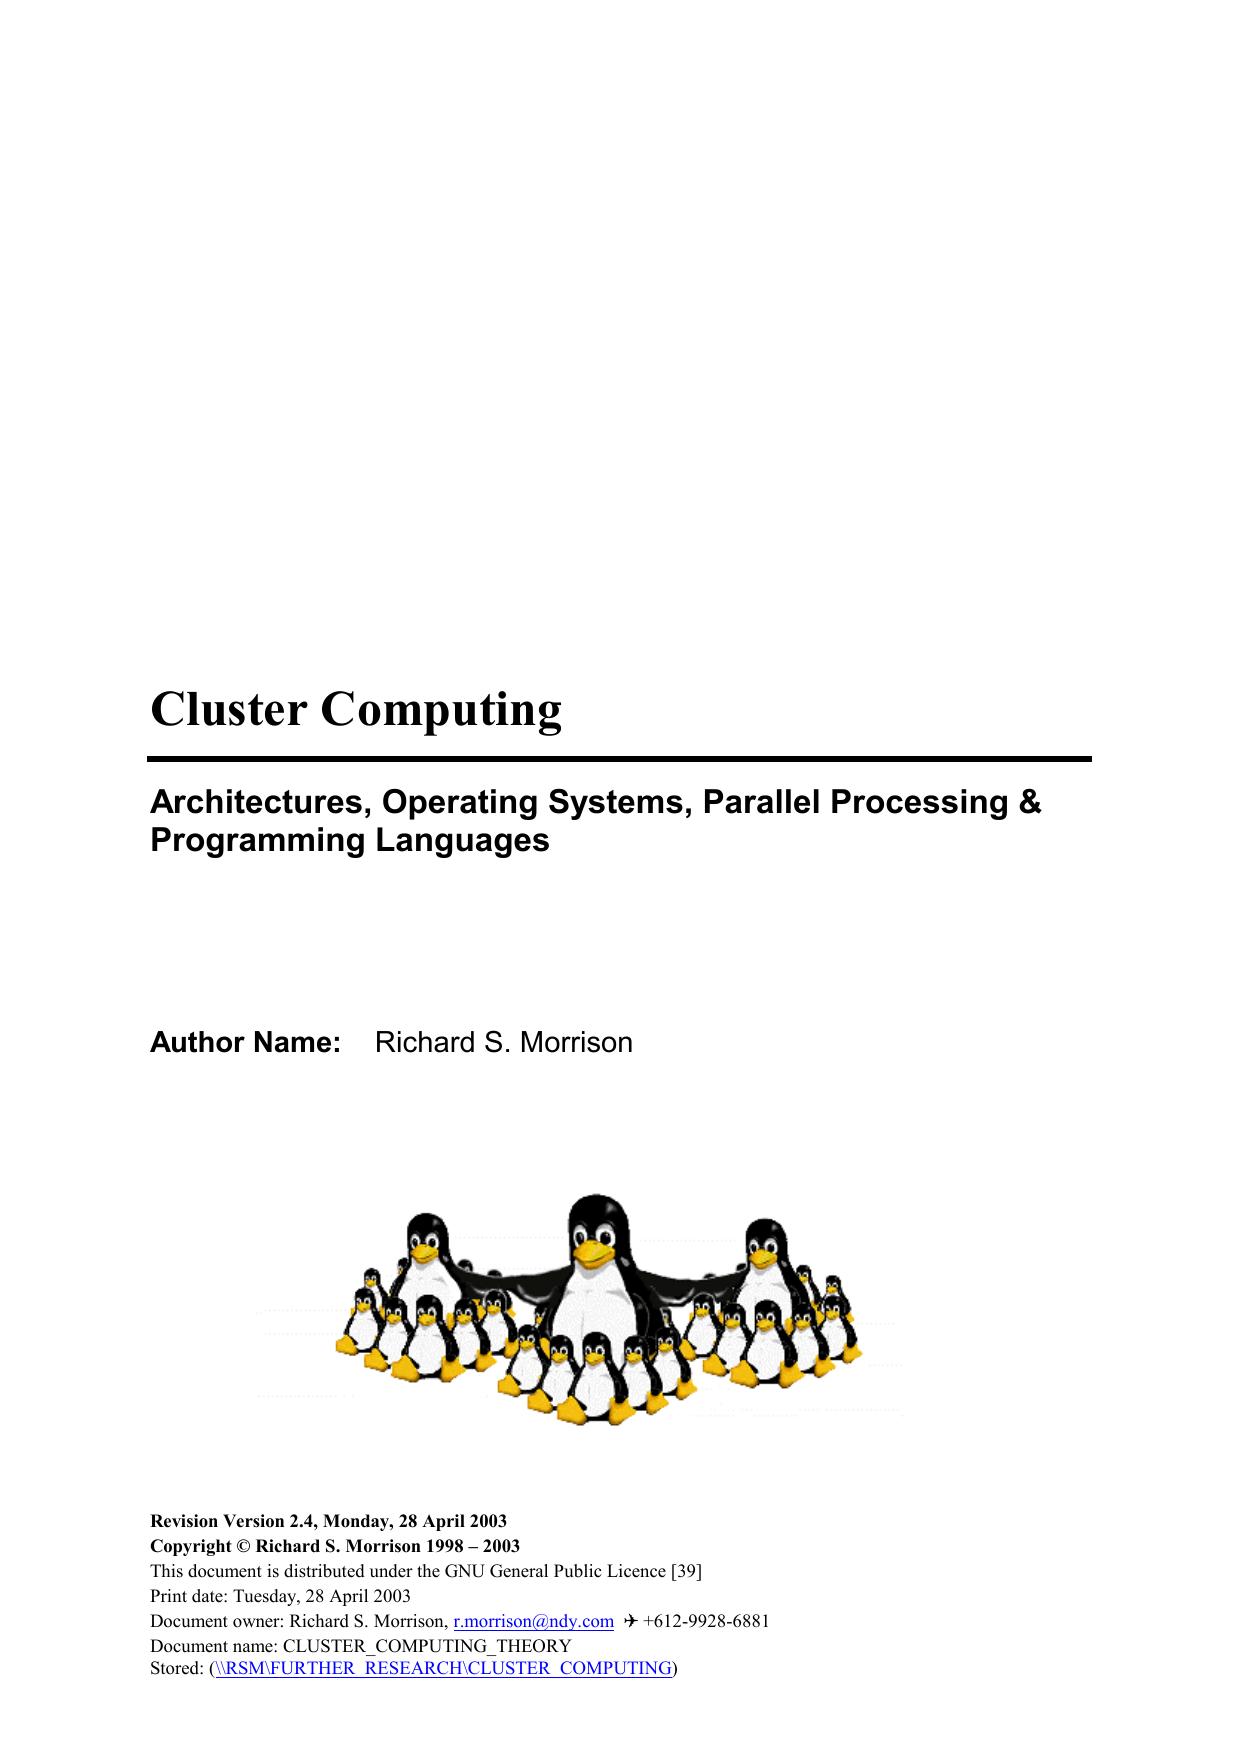 Cluster Computing: Architectures, Operating Systems, Parallel Processing & Programming Languages